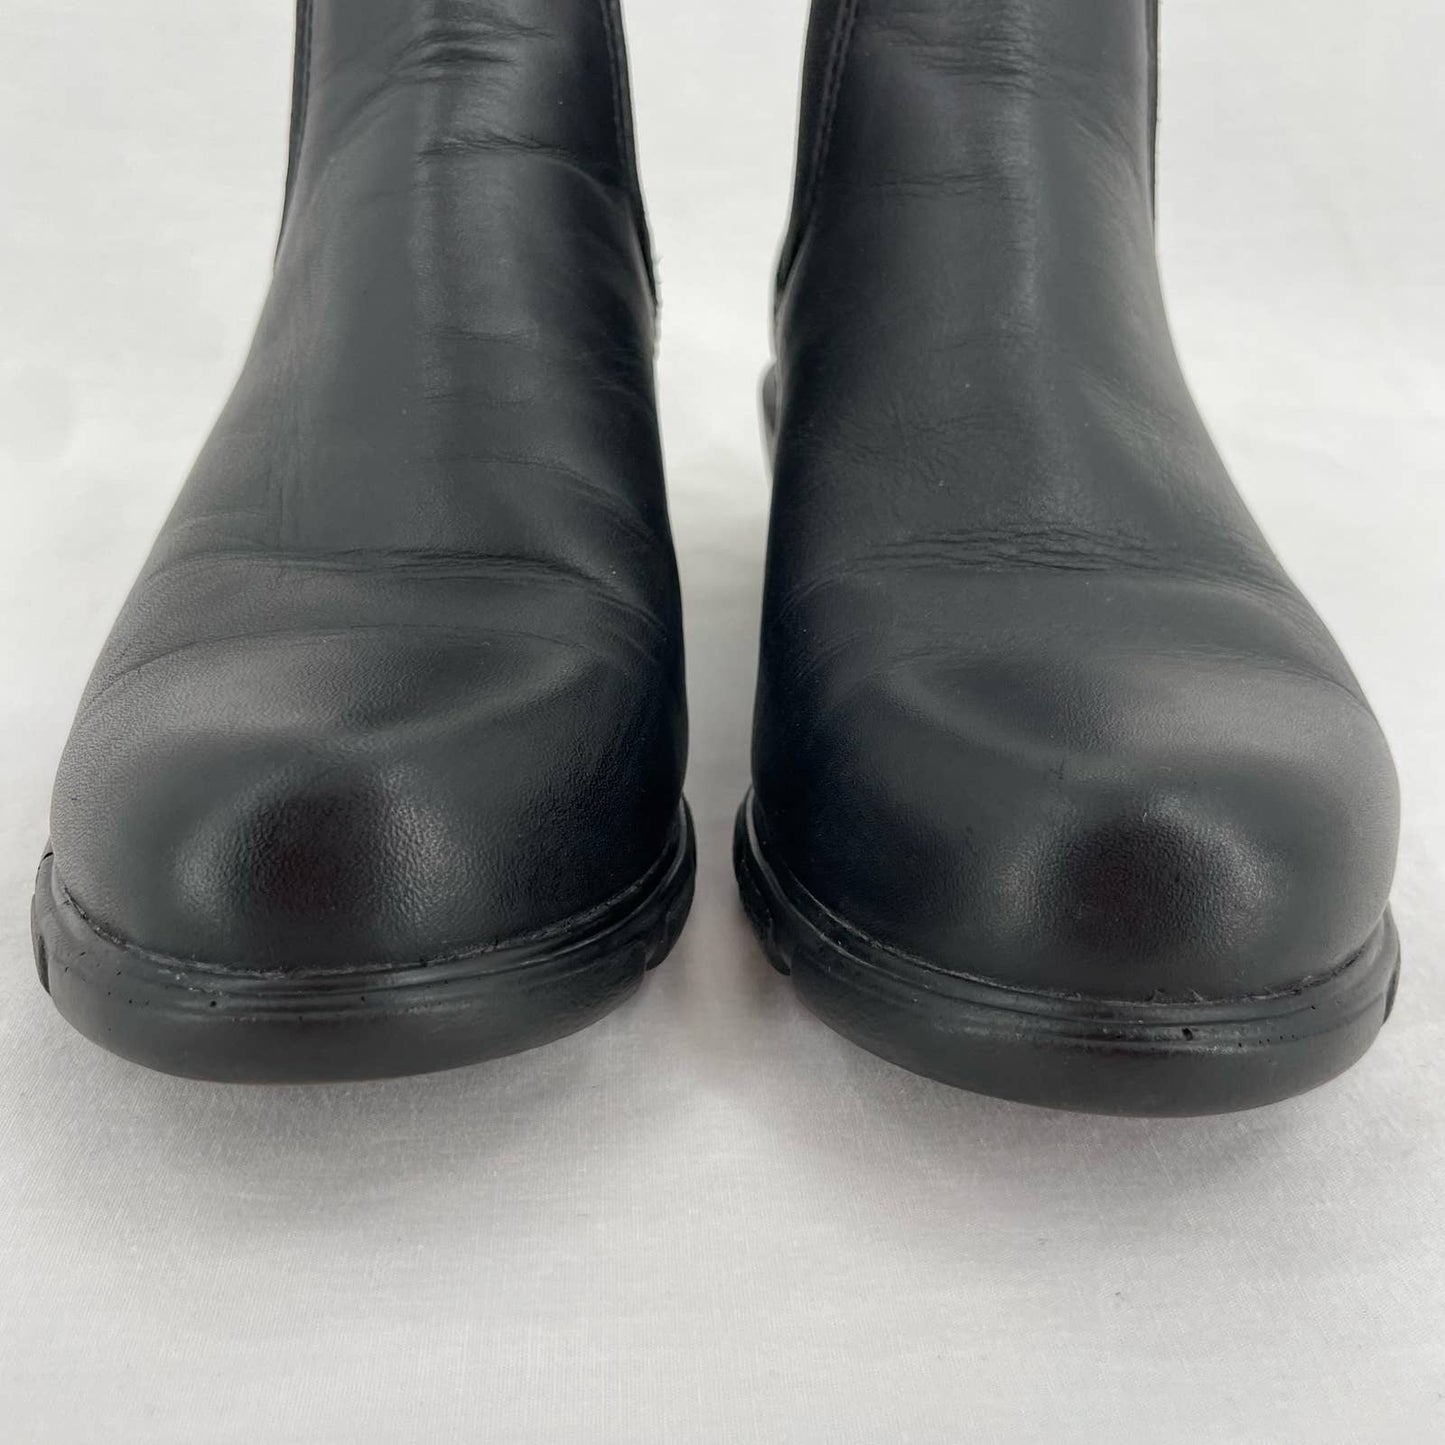 Blundstone 1671 Black Leather Heeled Boot Classic Chelsea Style Ankle Shoes Size US 7